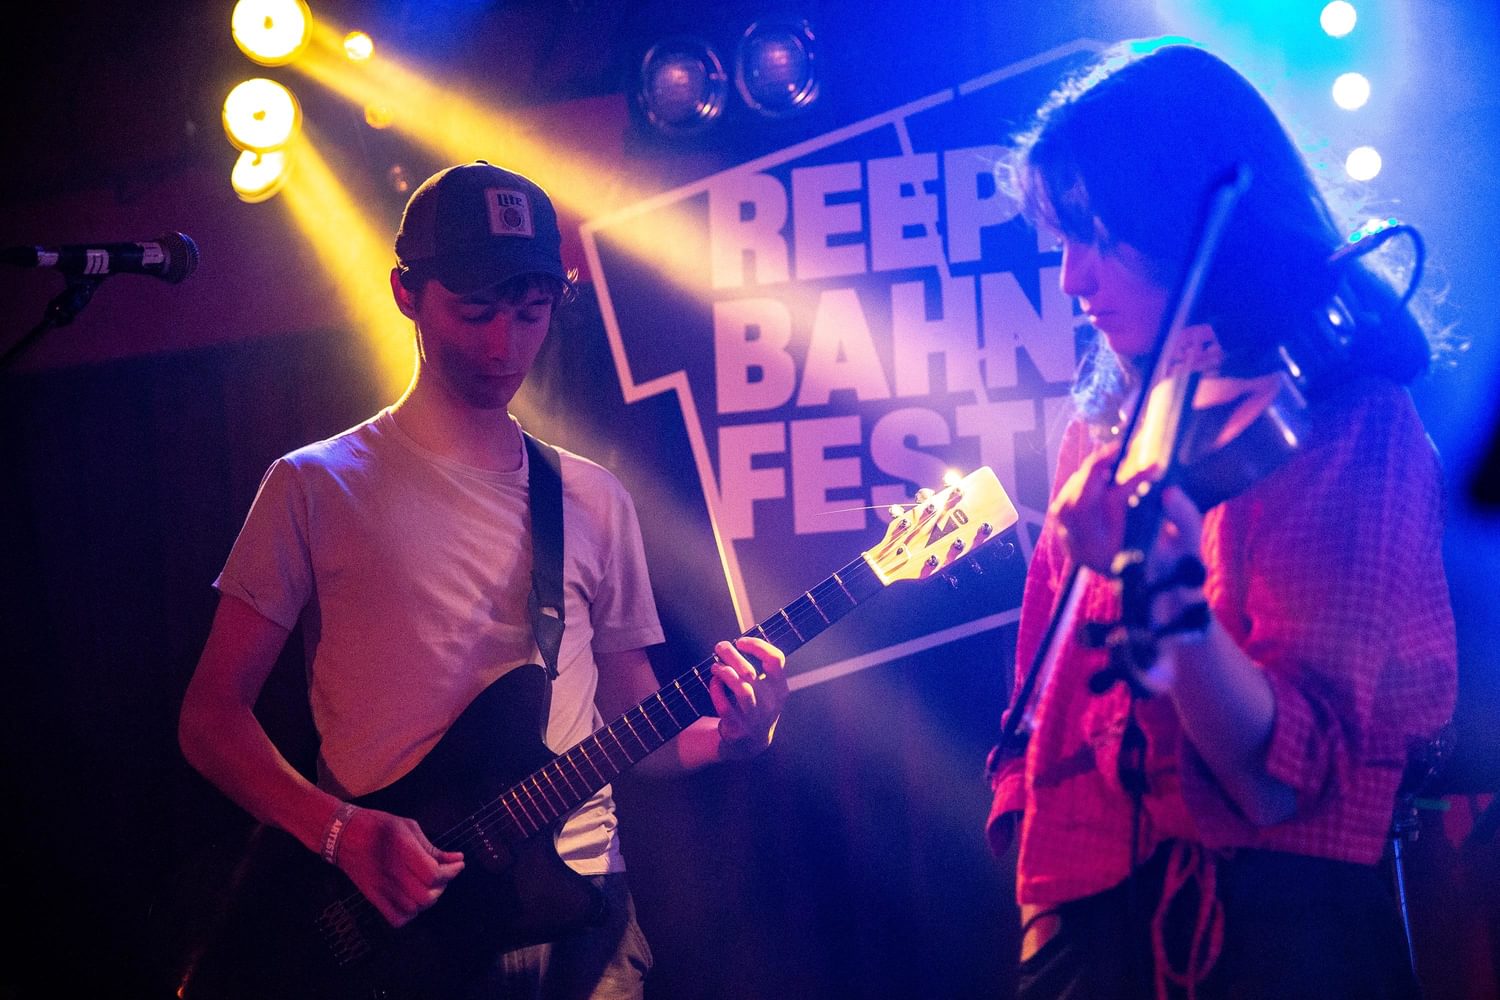 Sorry and Black Country, New Road impress at Reeperbahn 2019